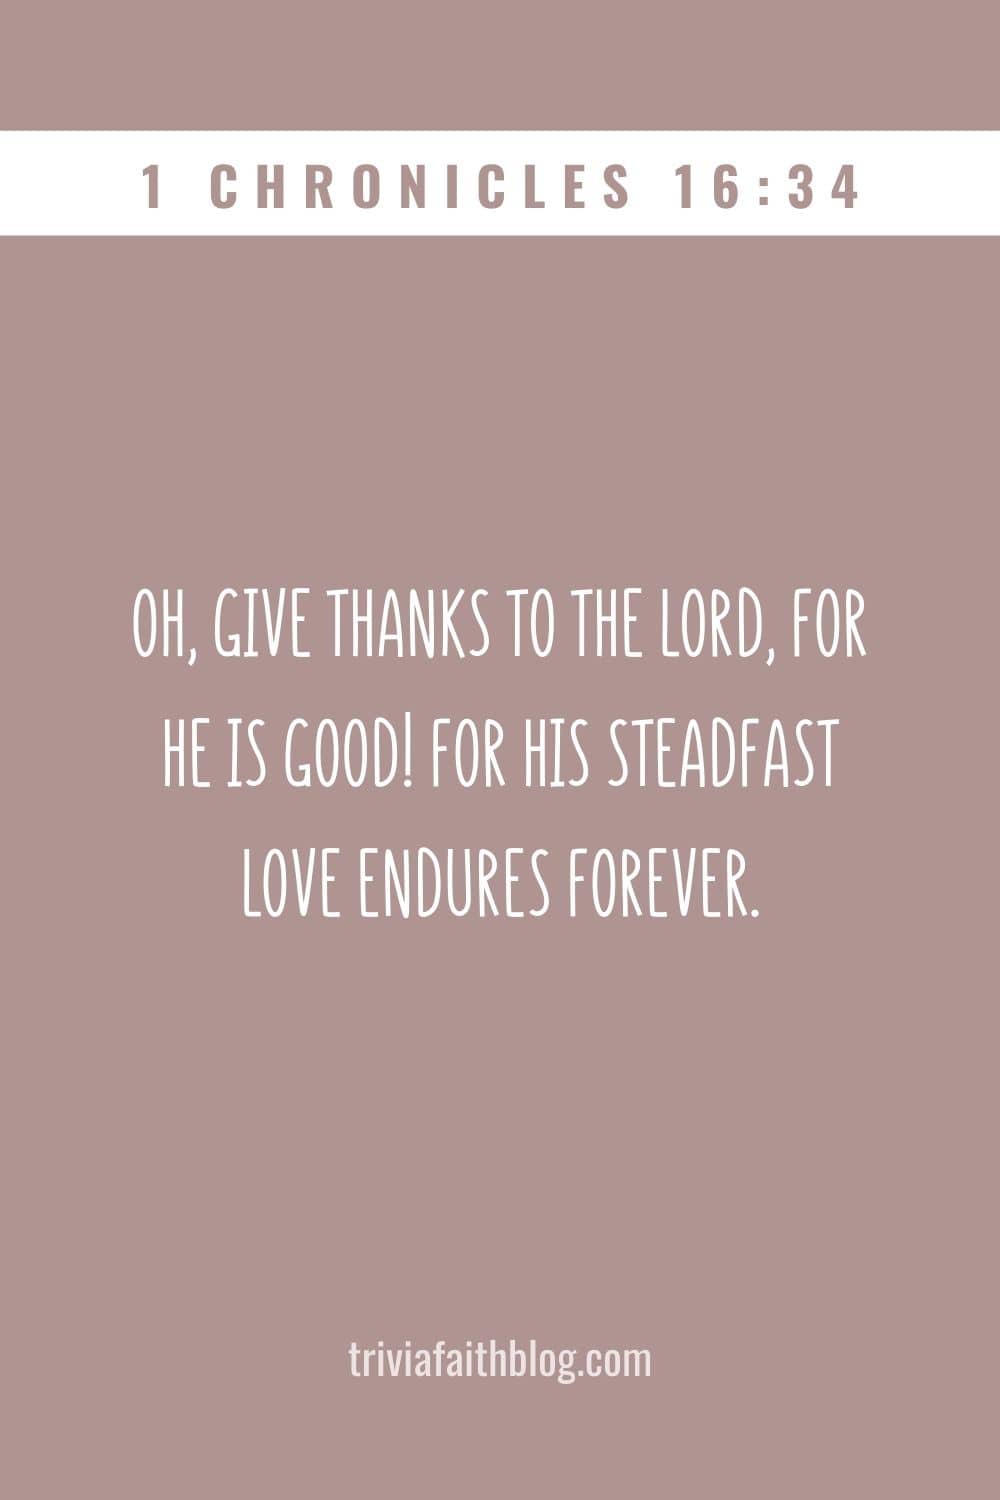 Oh, give thanks to the Lord, for he is good! For his steadfast love endures forever